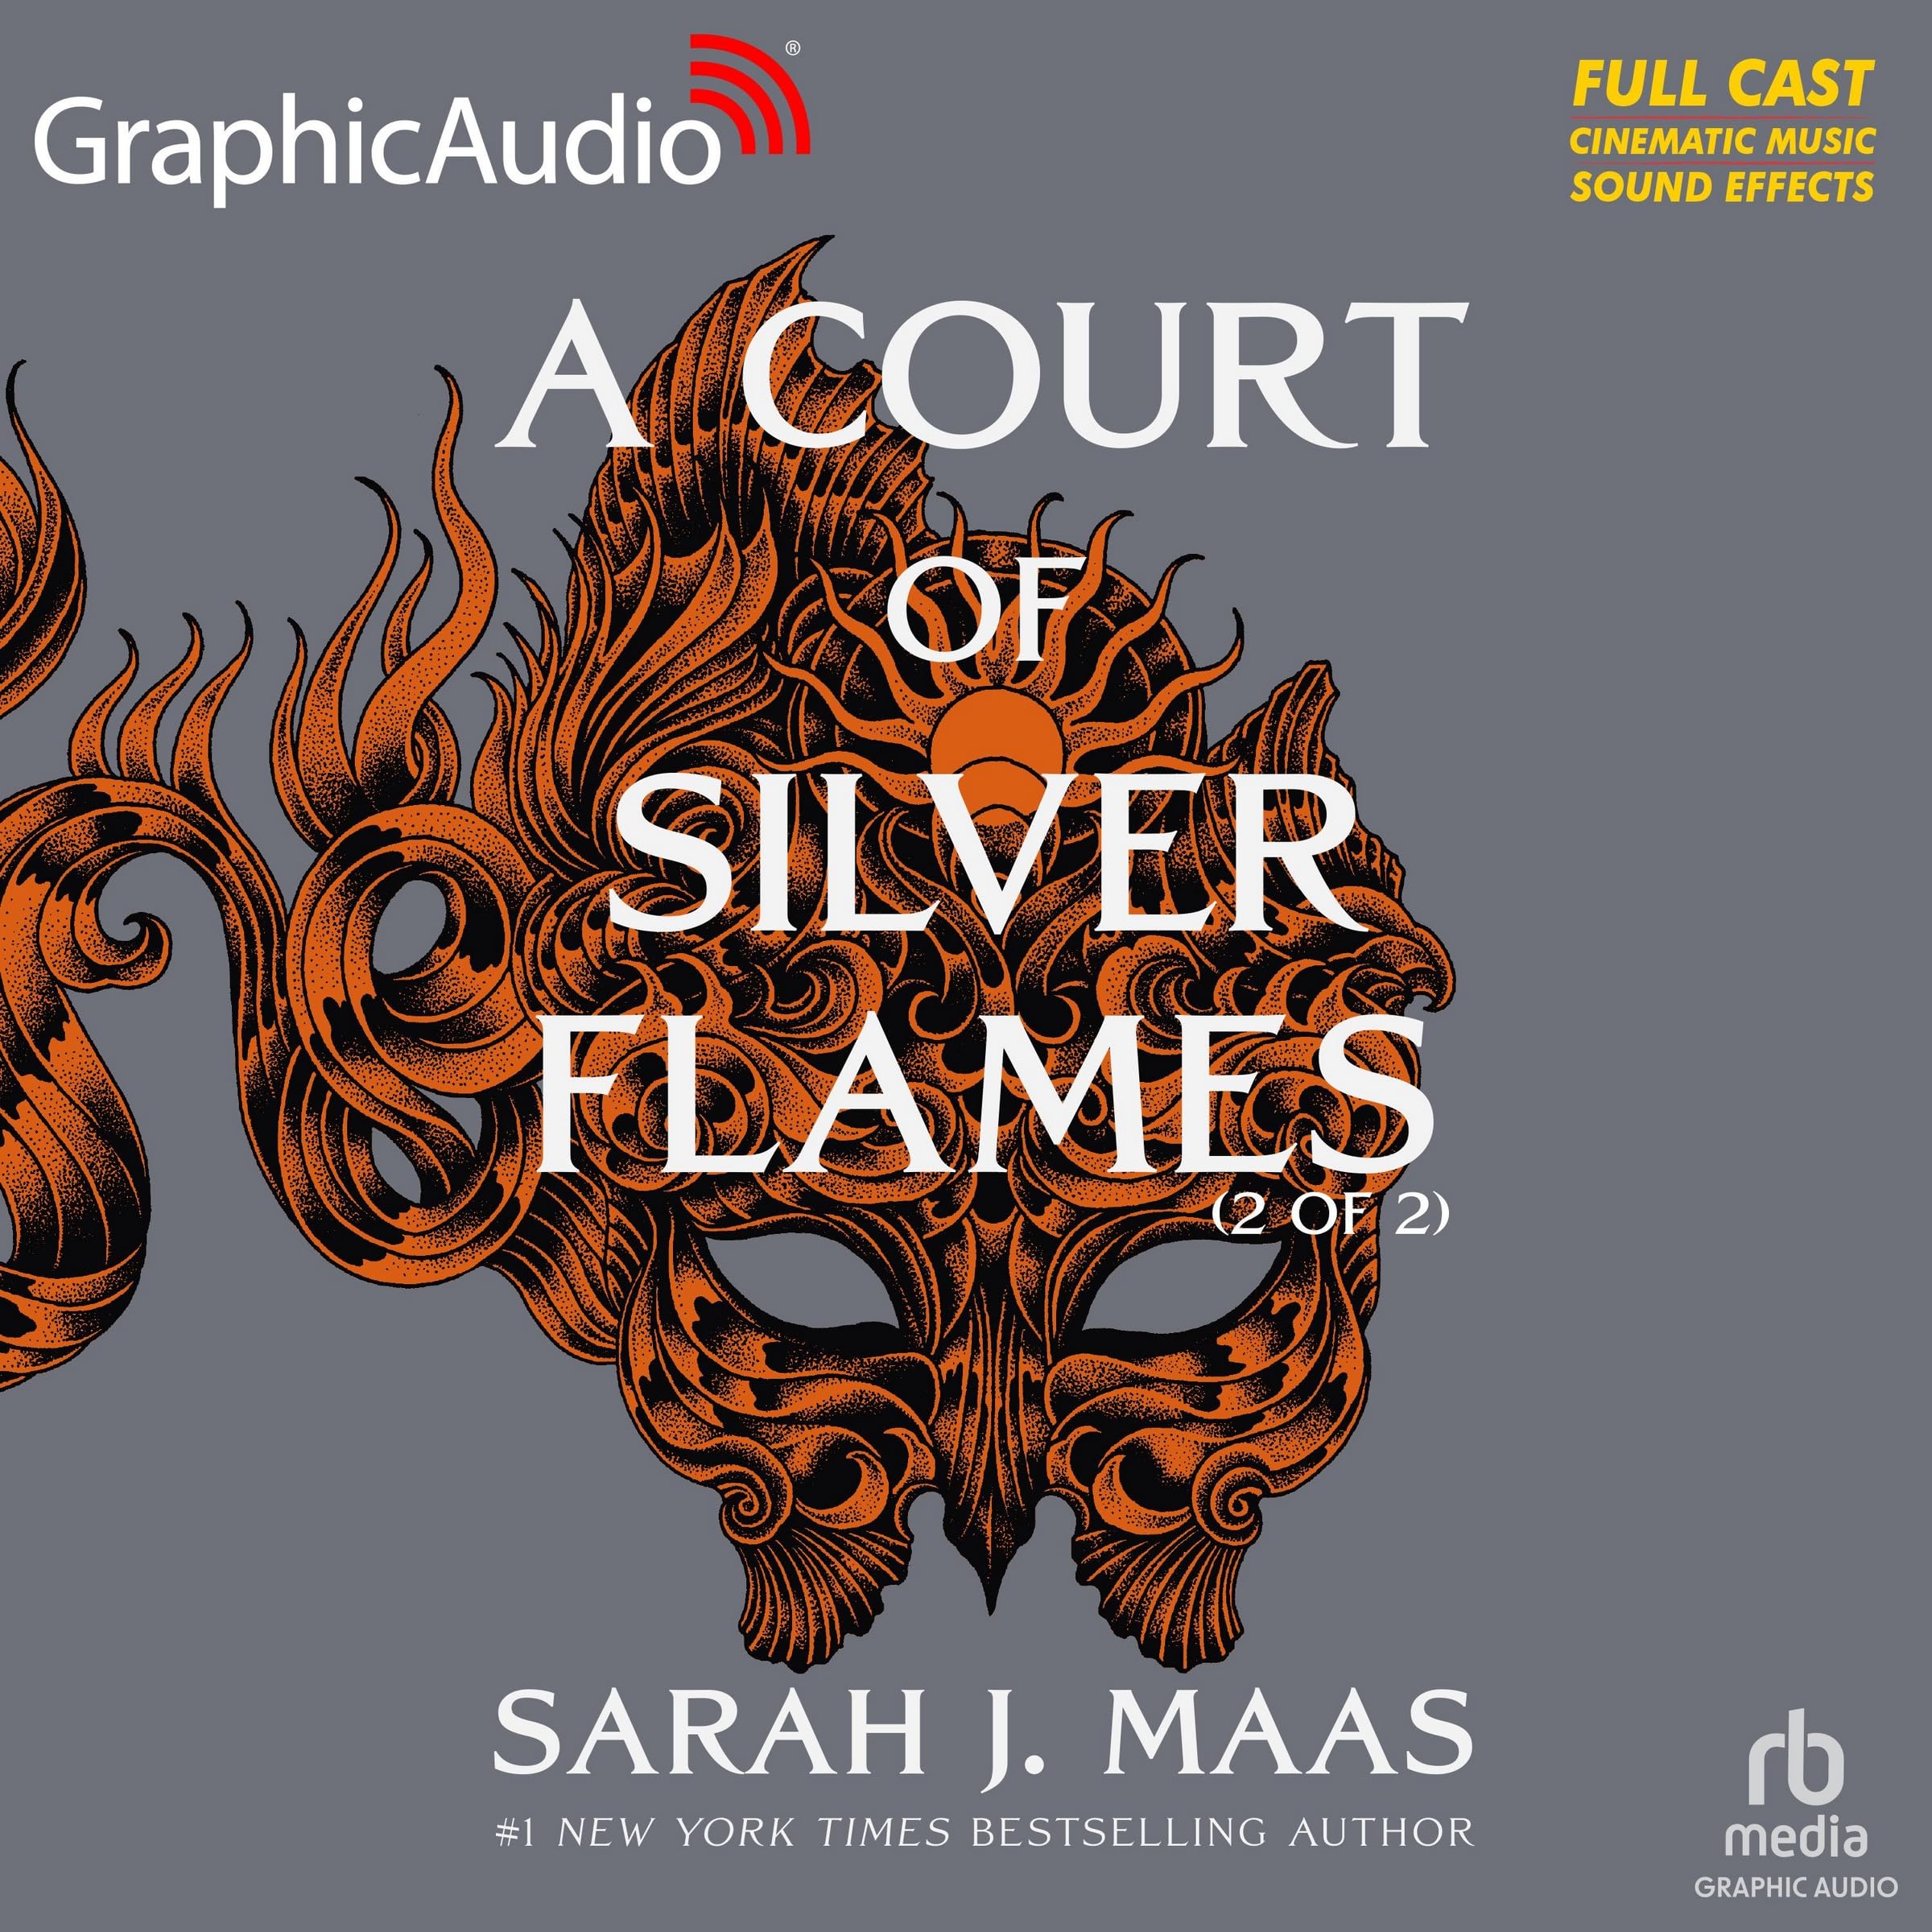 A Court of Silver Flames (2 of 2) [Dramatized Adaptation]: A Court of Thorns and Roses 4 (Court of Thorns and Roses)